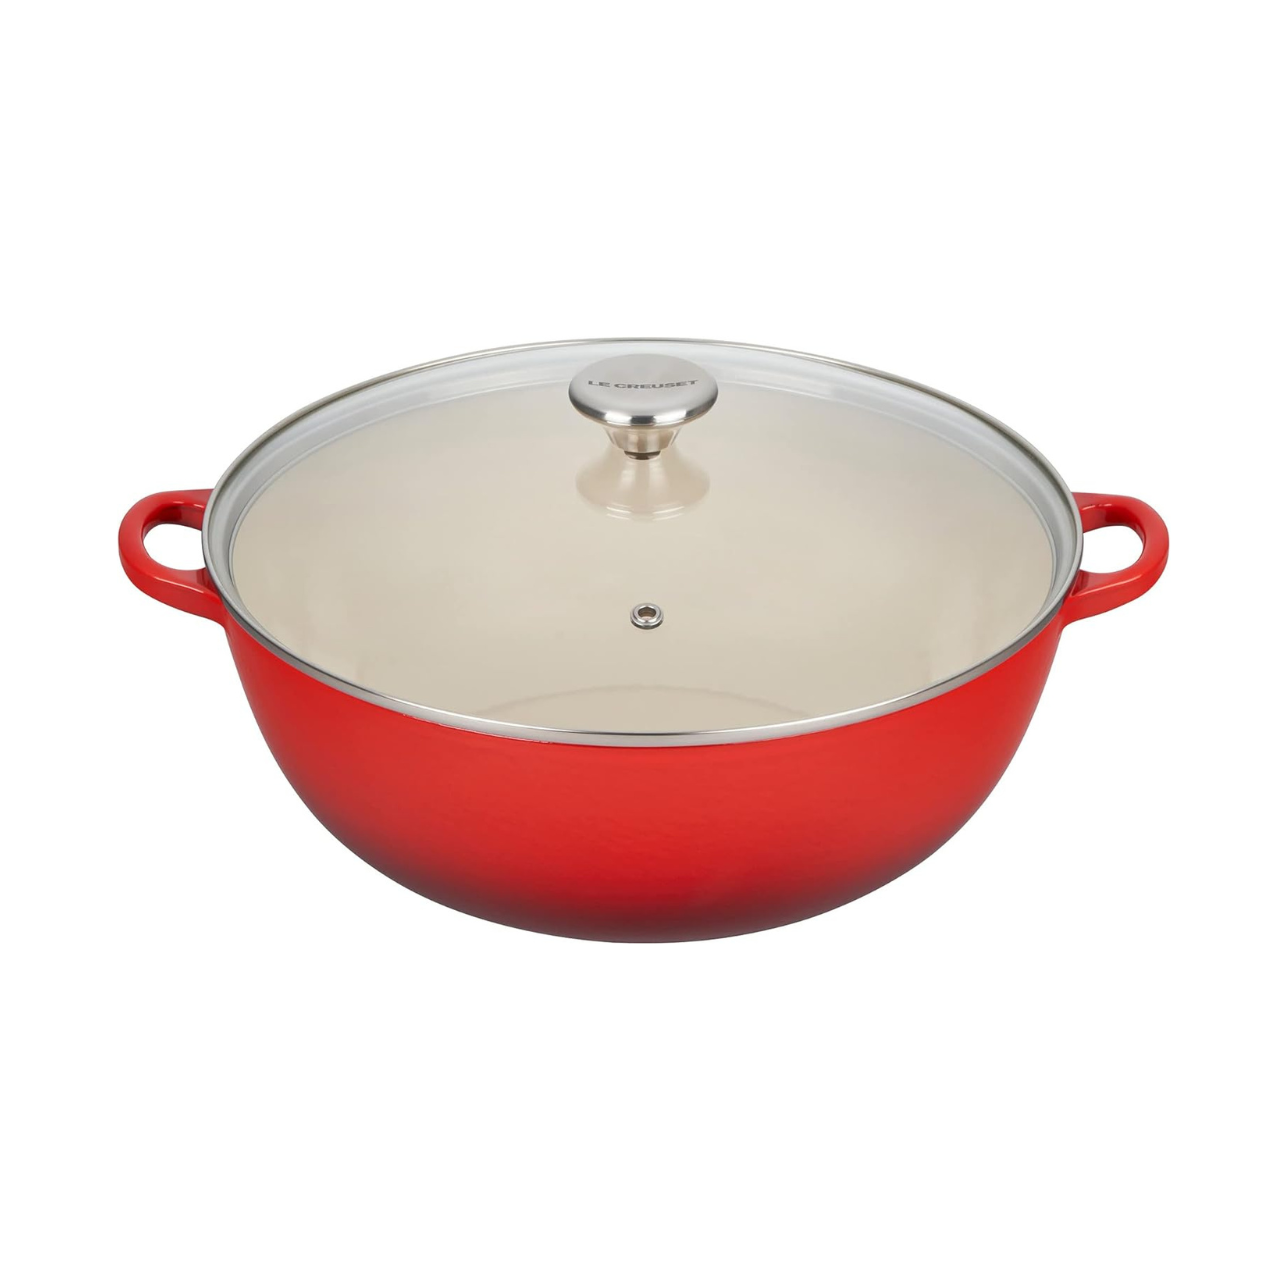 Le Creuset Enameled Cast Iron Chef’s Oven with Glass Lid, 7.5 qt.